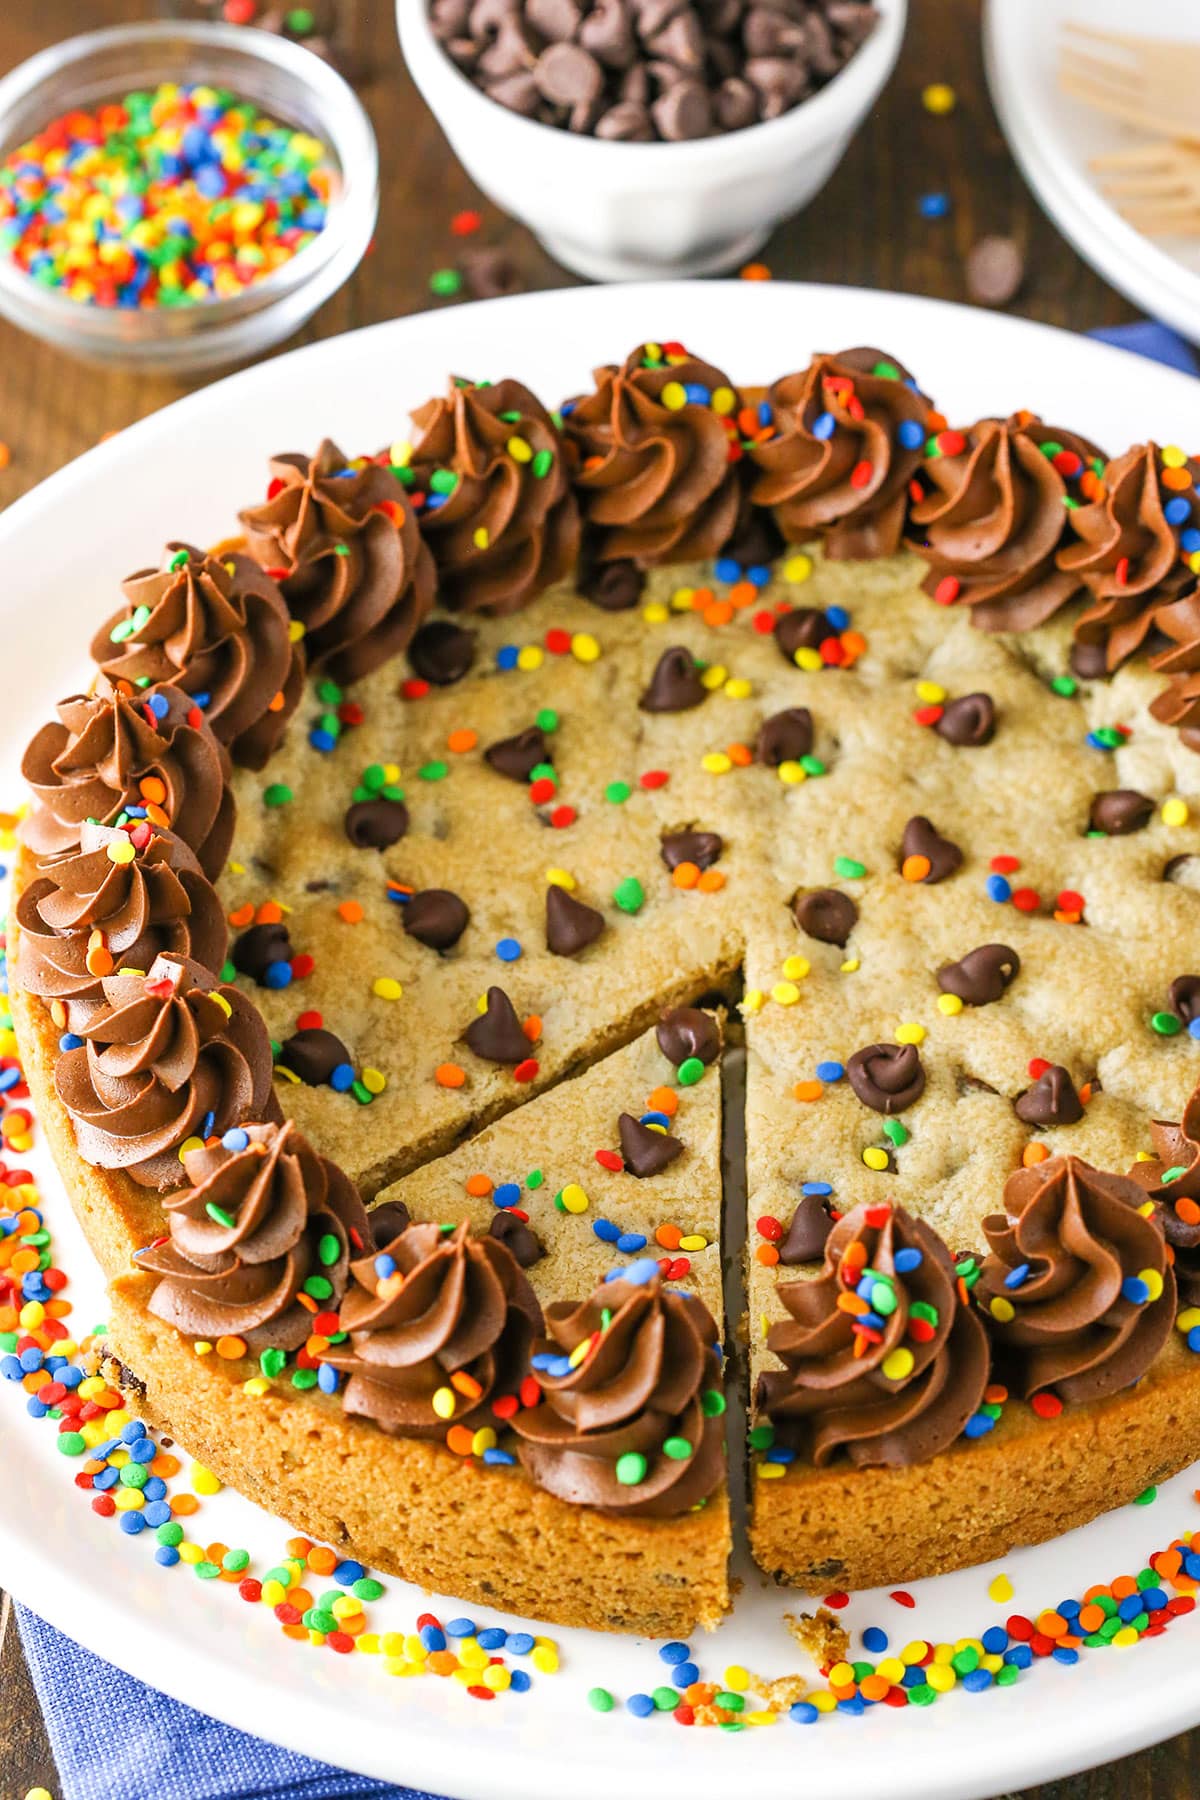 Chocolate Chip Cookie Cake - The Girl Who Ate Everything